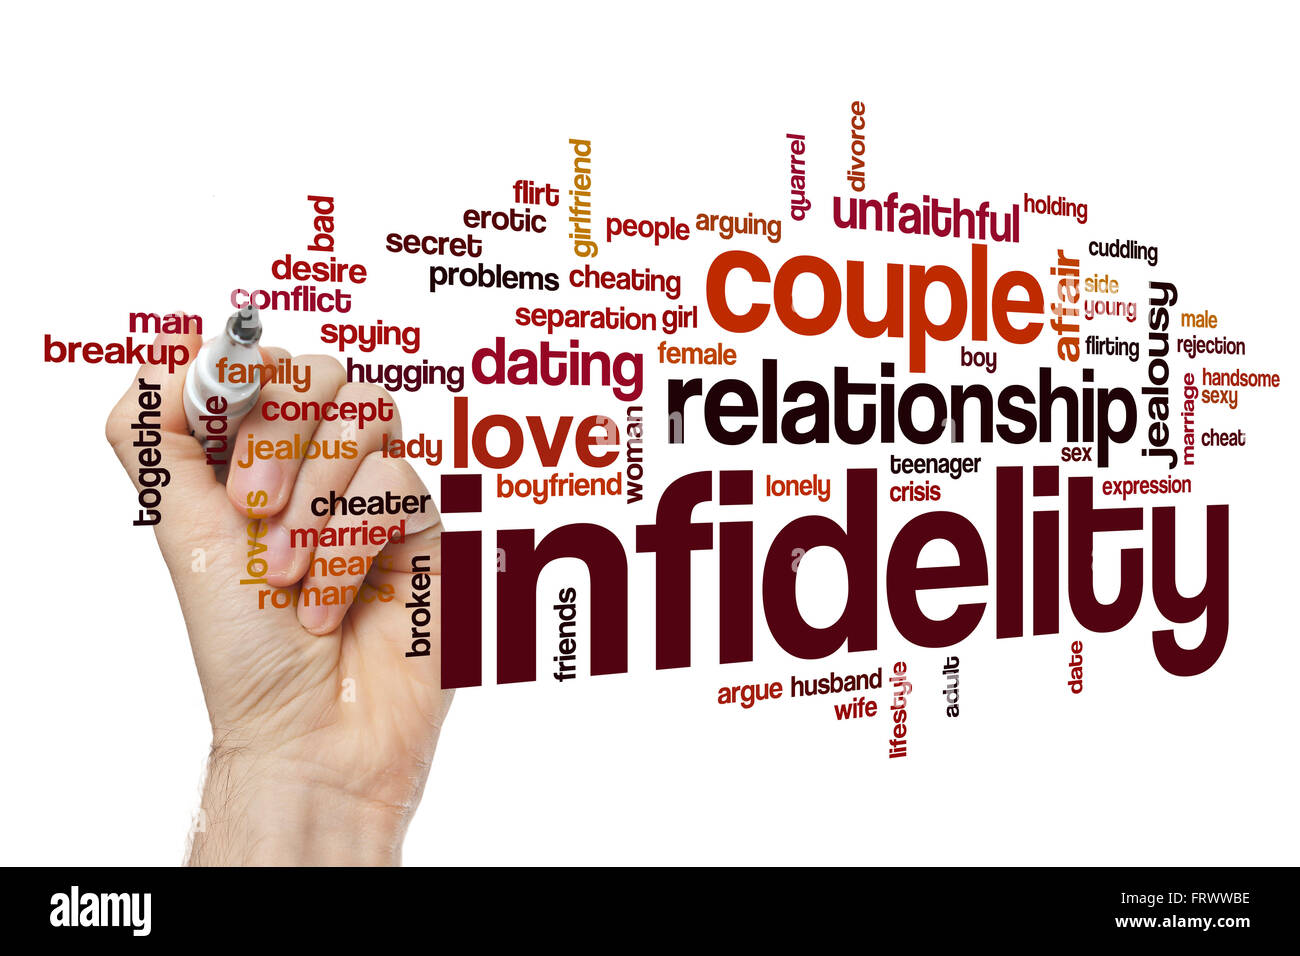 Woman infidelity boyfriend Cut Out Stock Images and Pictures picture picture